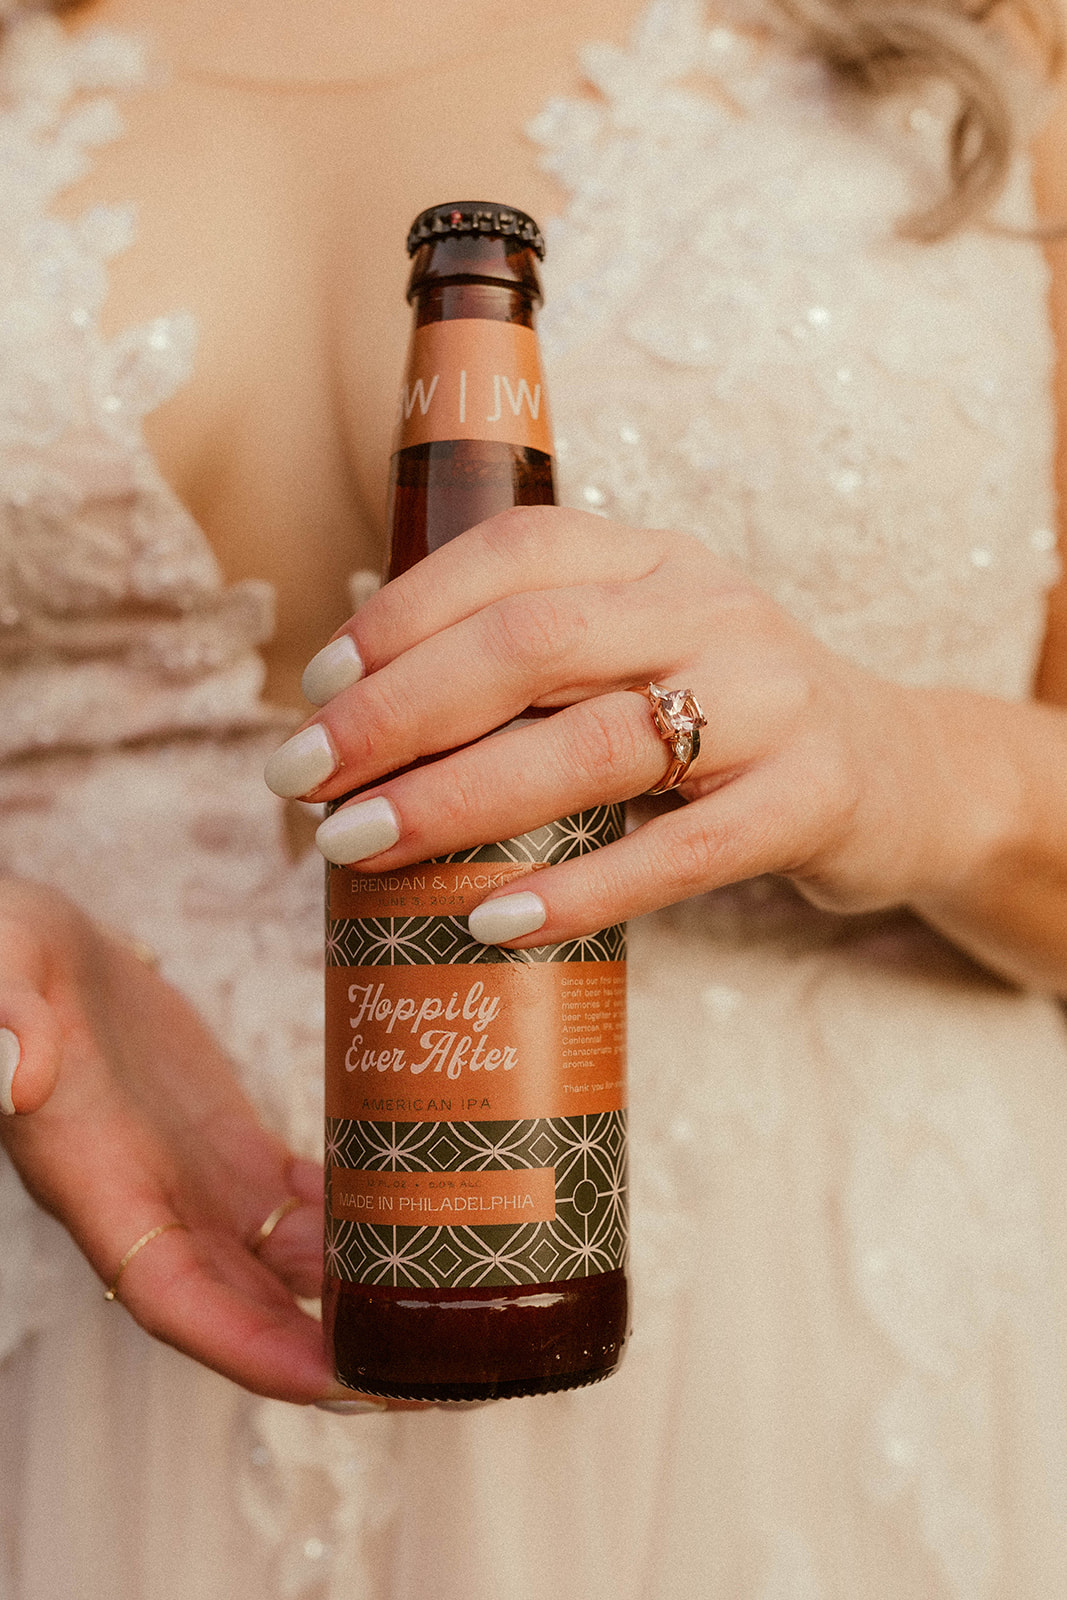 Stunning bride holds her favorite beer to show off her new ring!